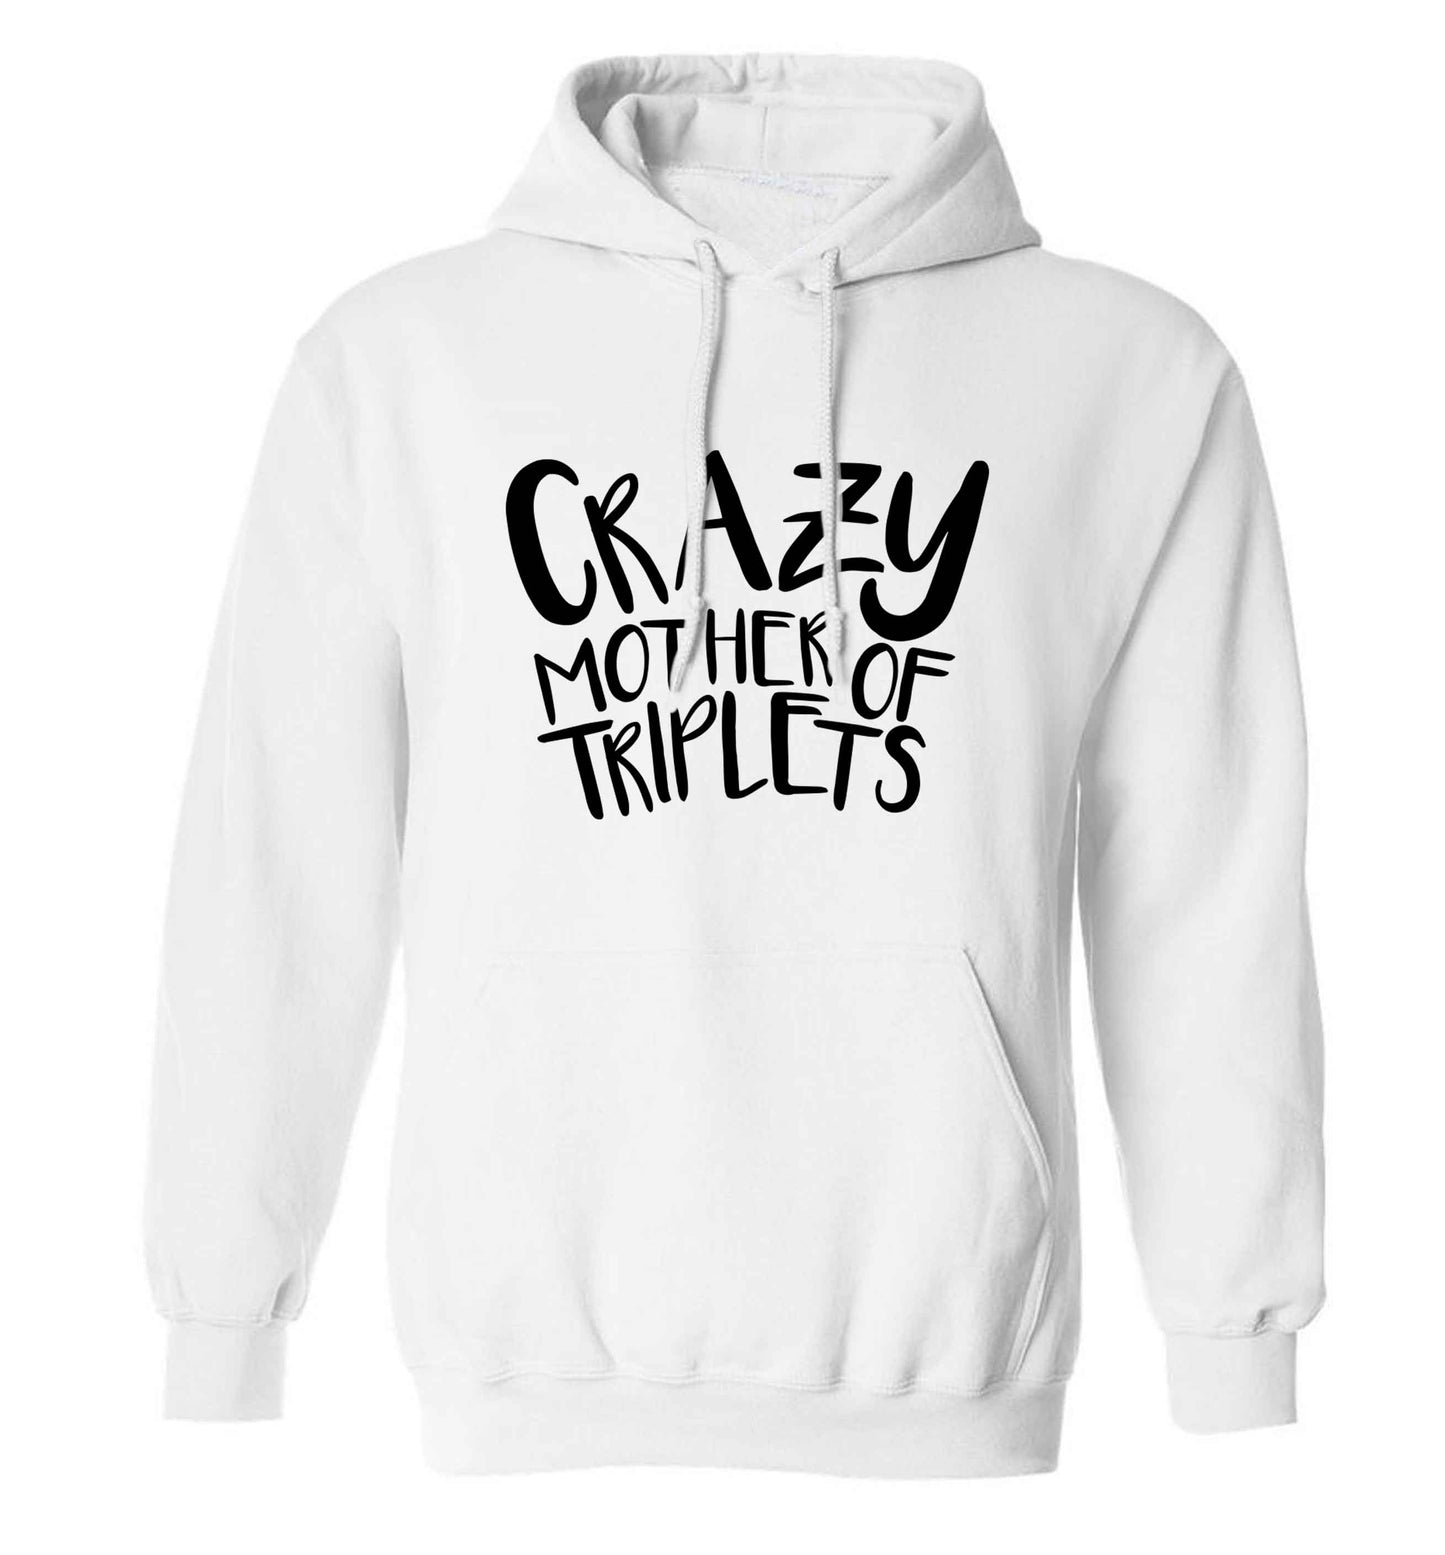 Crazy mother of triplets adults unisex white hoodie 2XL